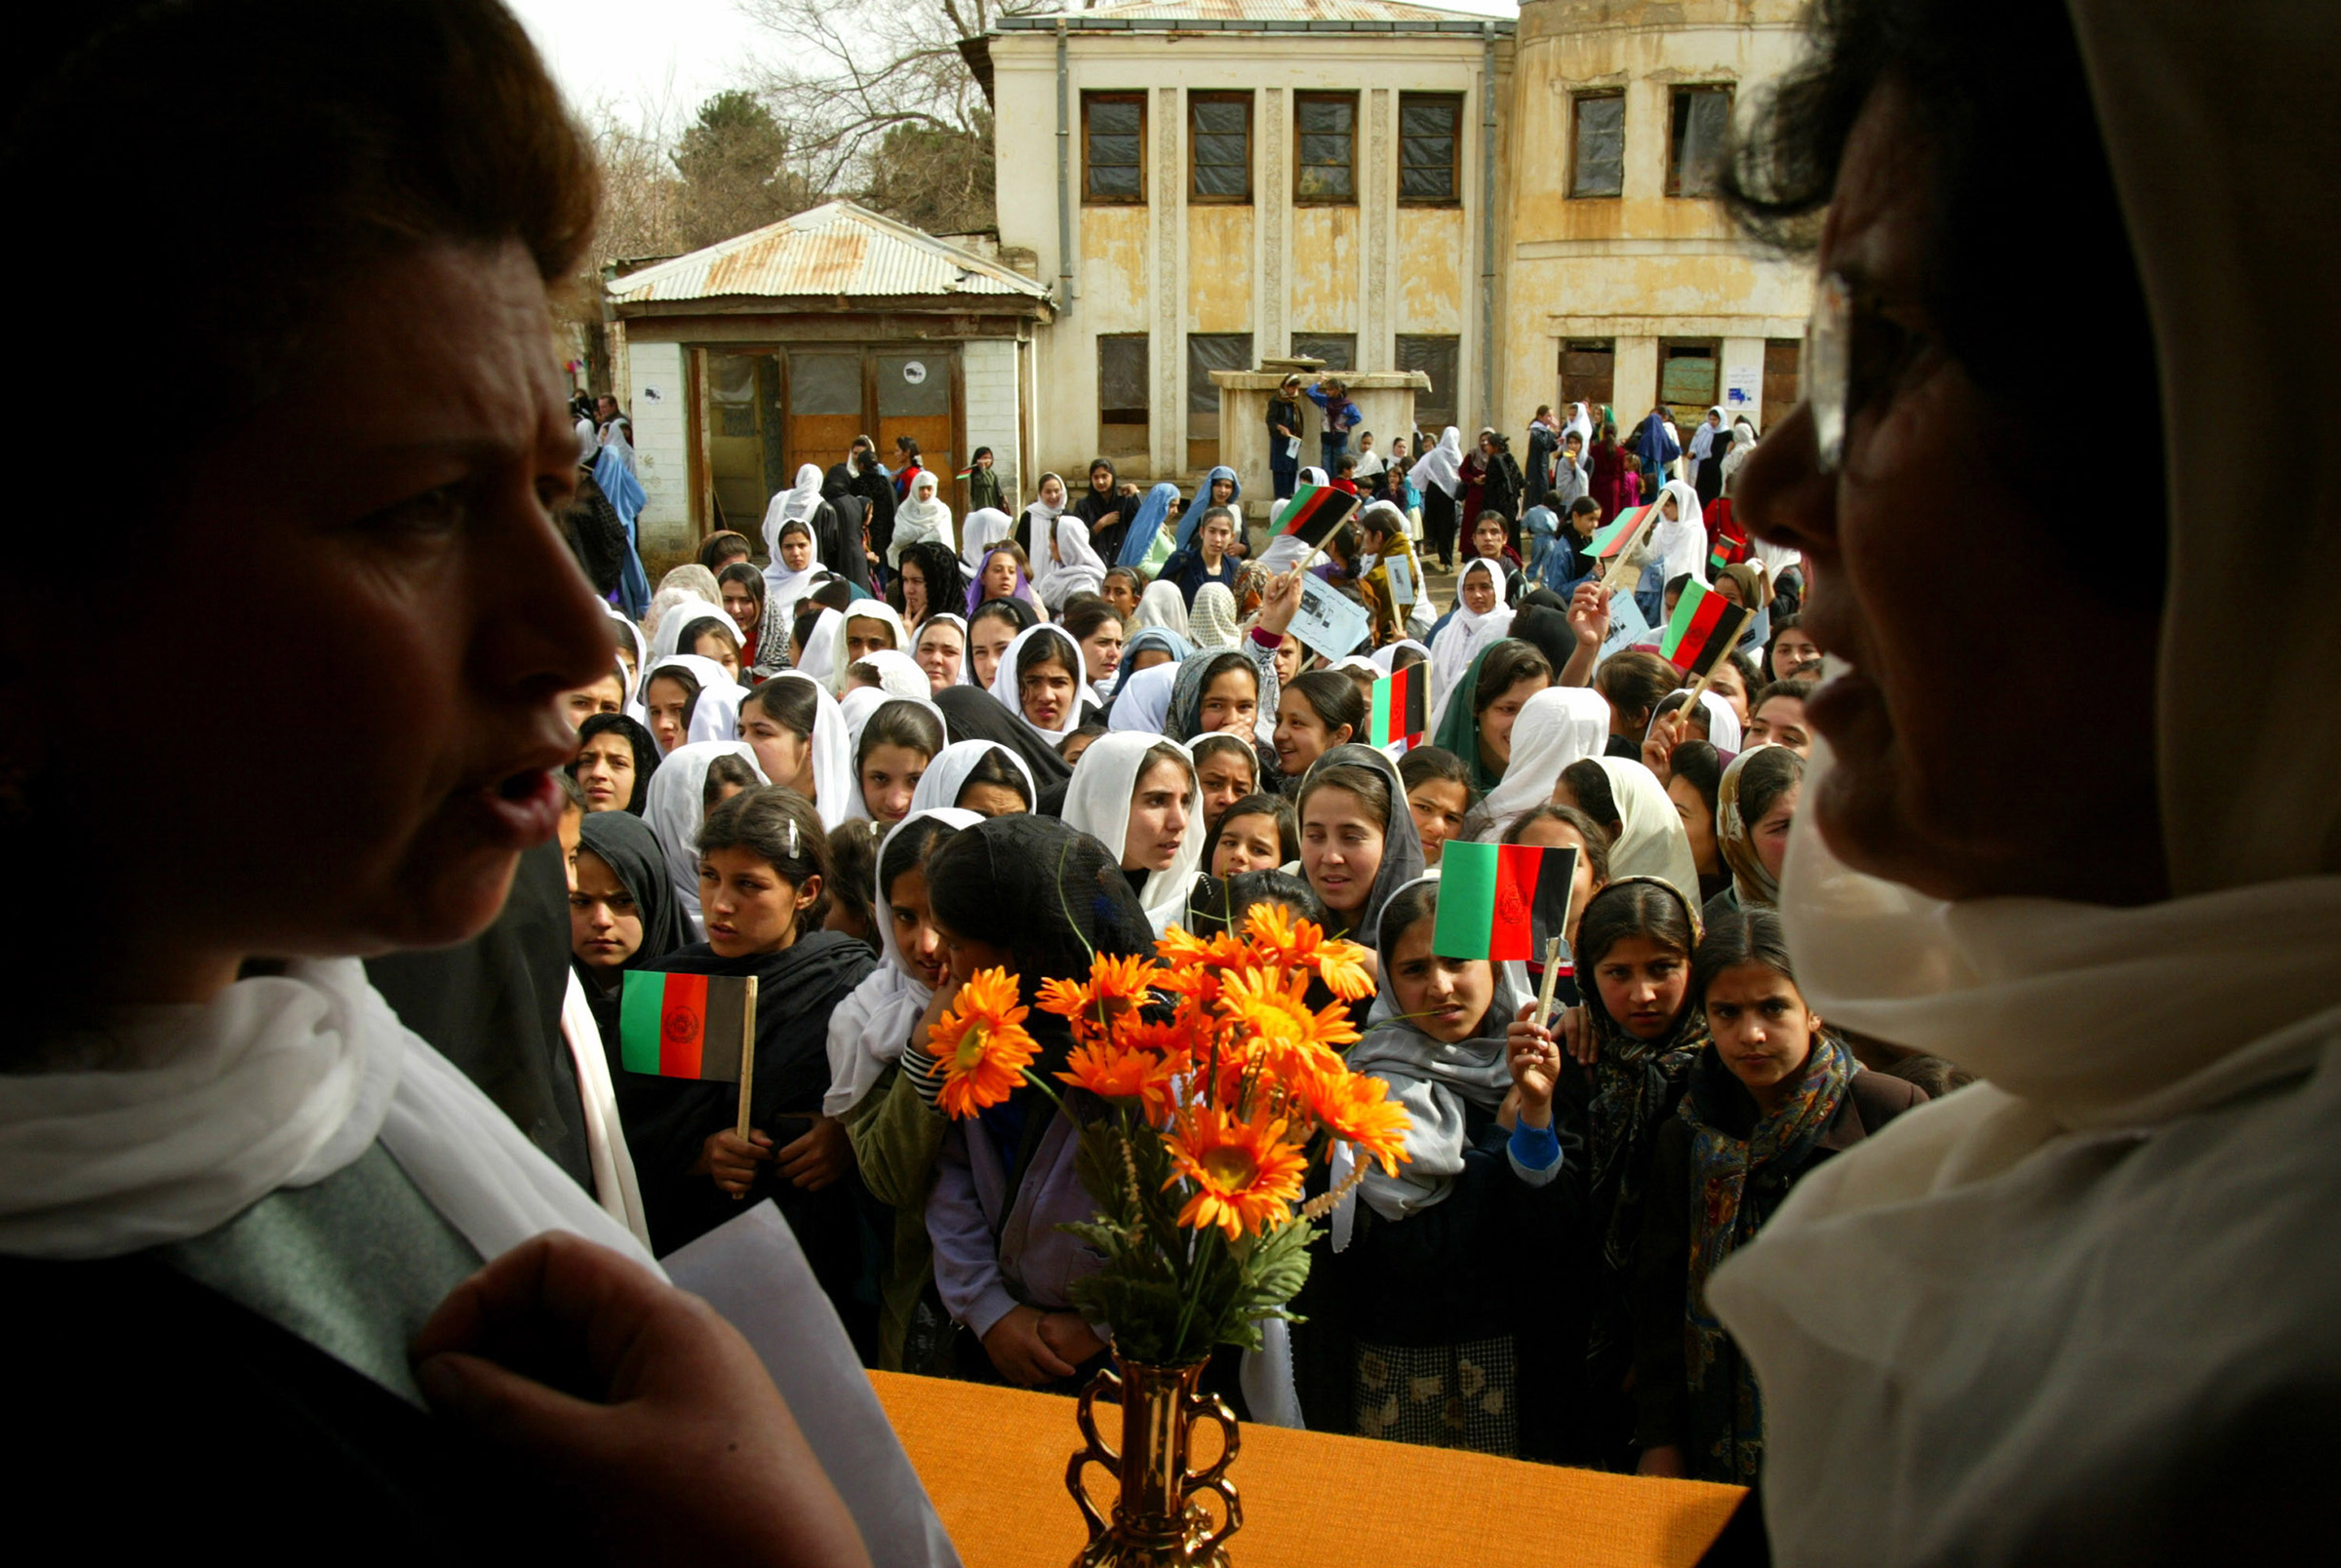 Teachers prepare to organize students into a group for the opening ceremonies on the first day of class at the Manoo Chera school in Kabul on March 23, 2002. (Robert Nickelsberg—Getty Images)